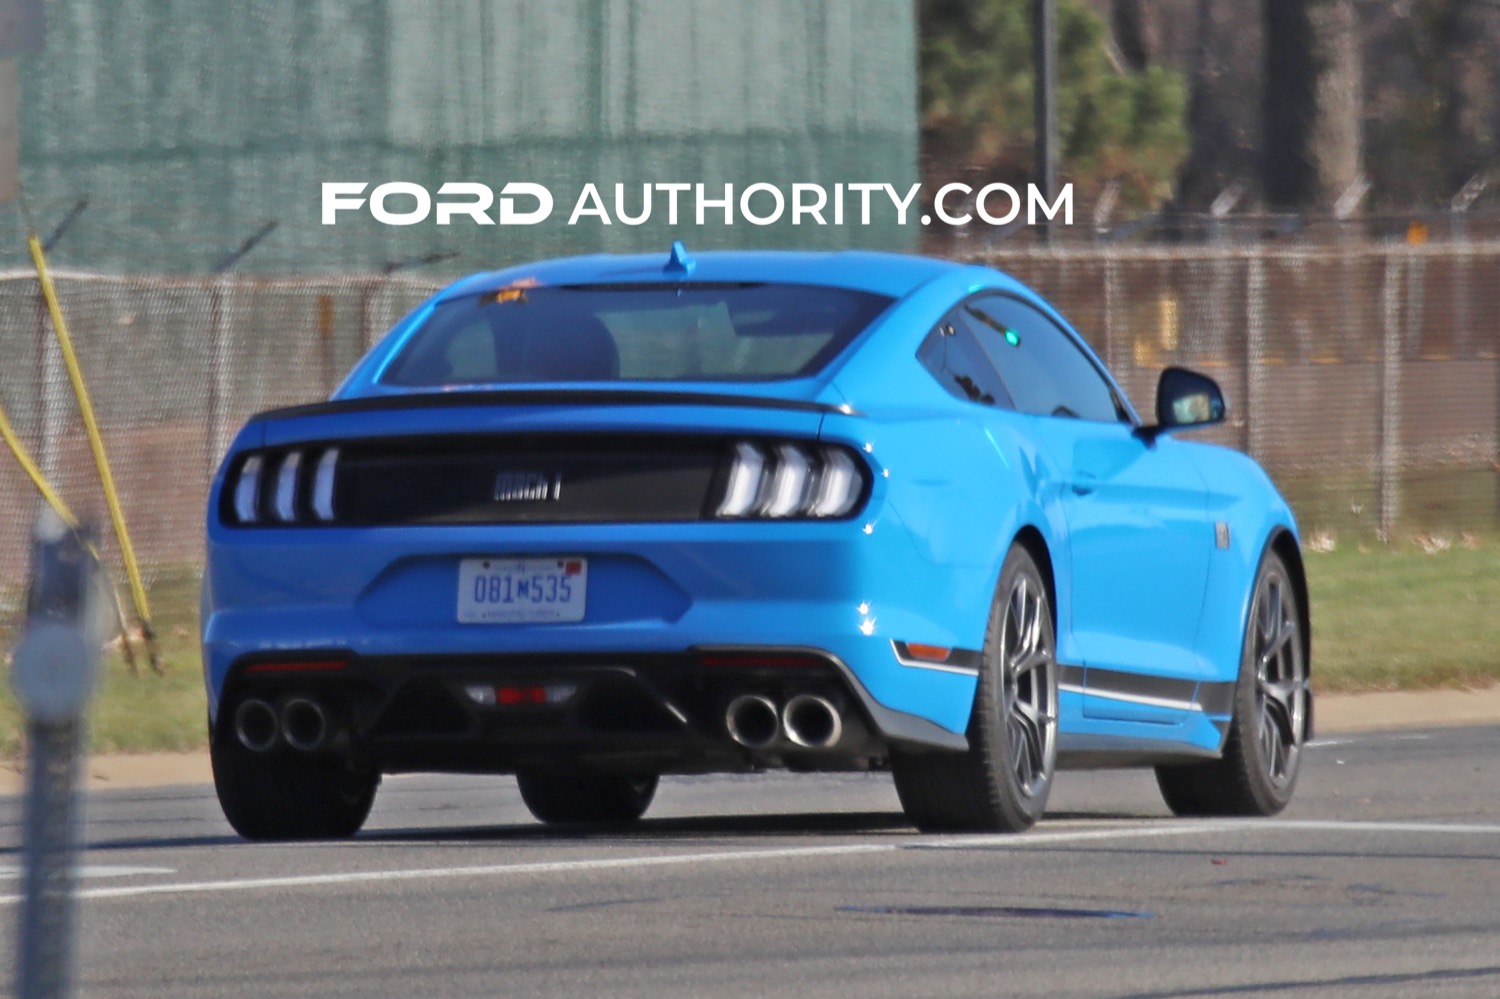 2022 Ford Mustang Gains New Grabber Blue Color First Look